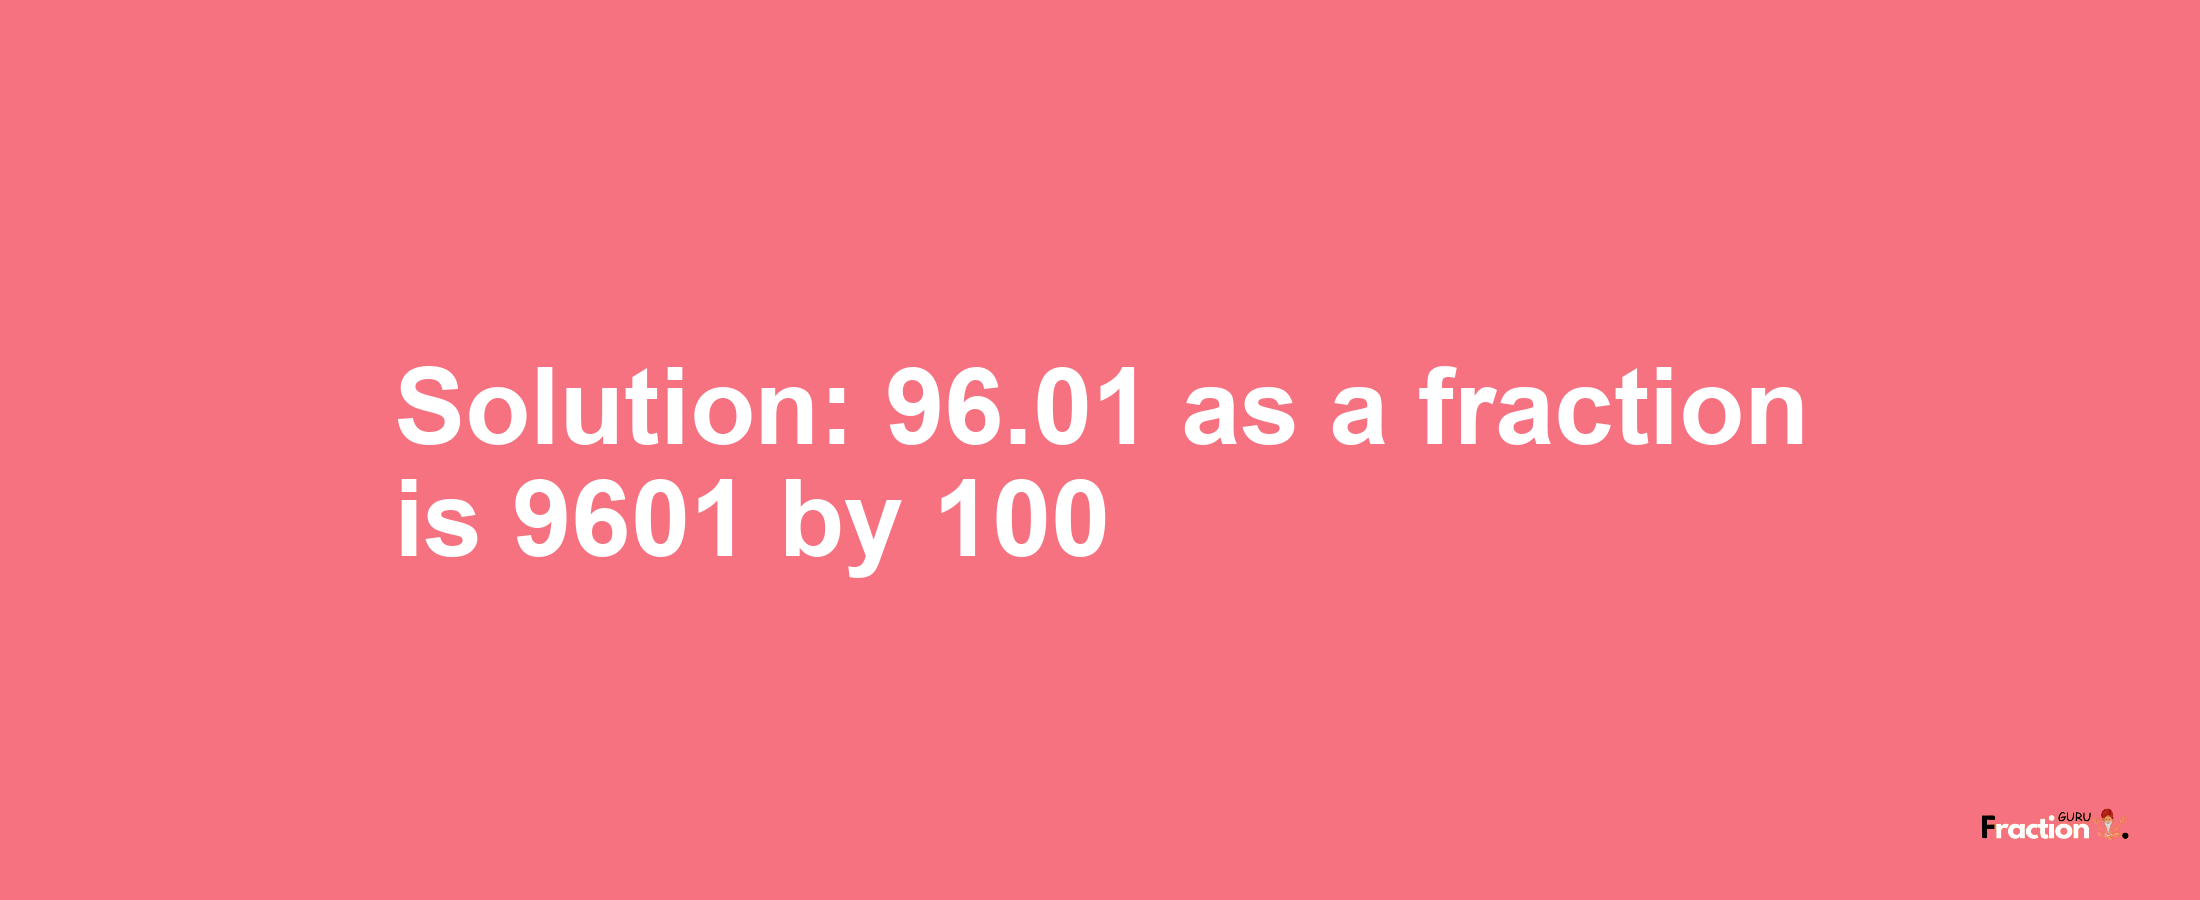 Solution:96.01 as a fraction is 9601/100